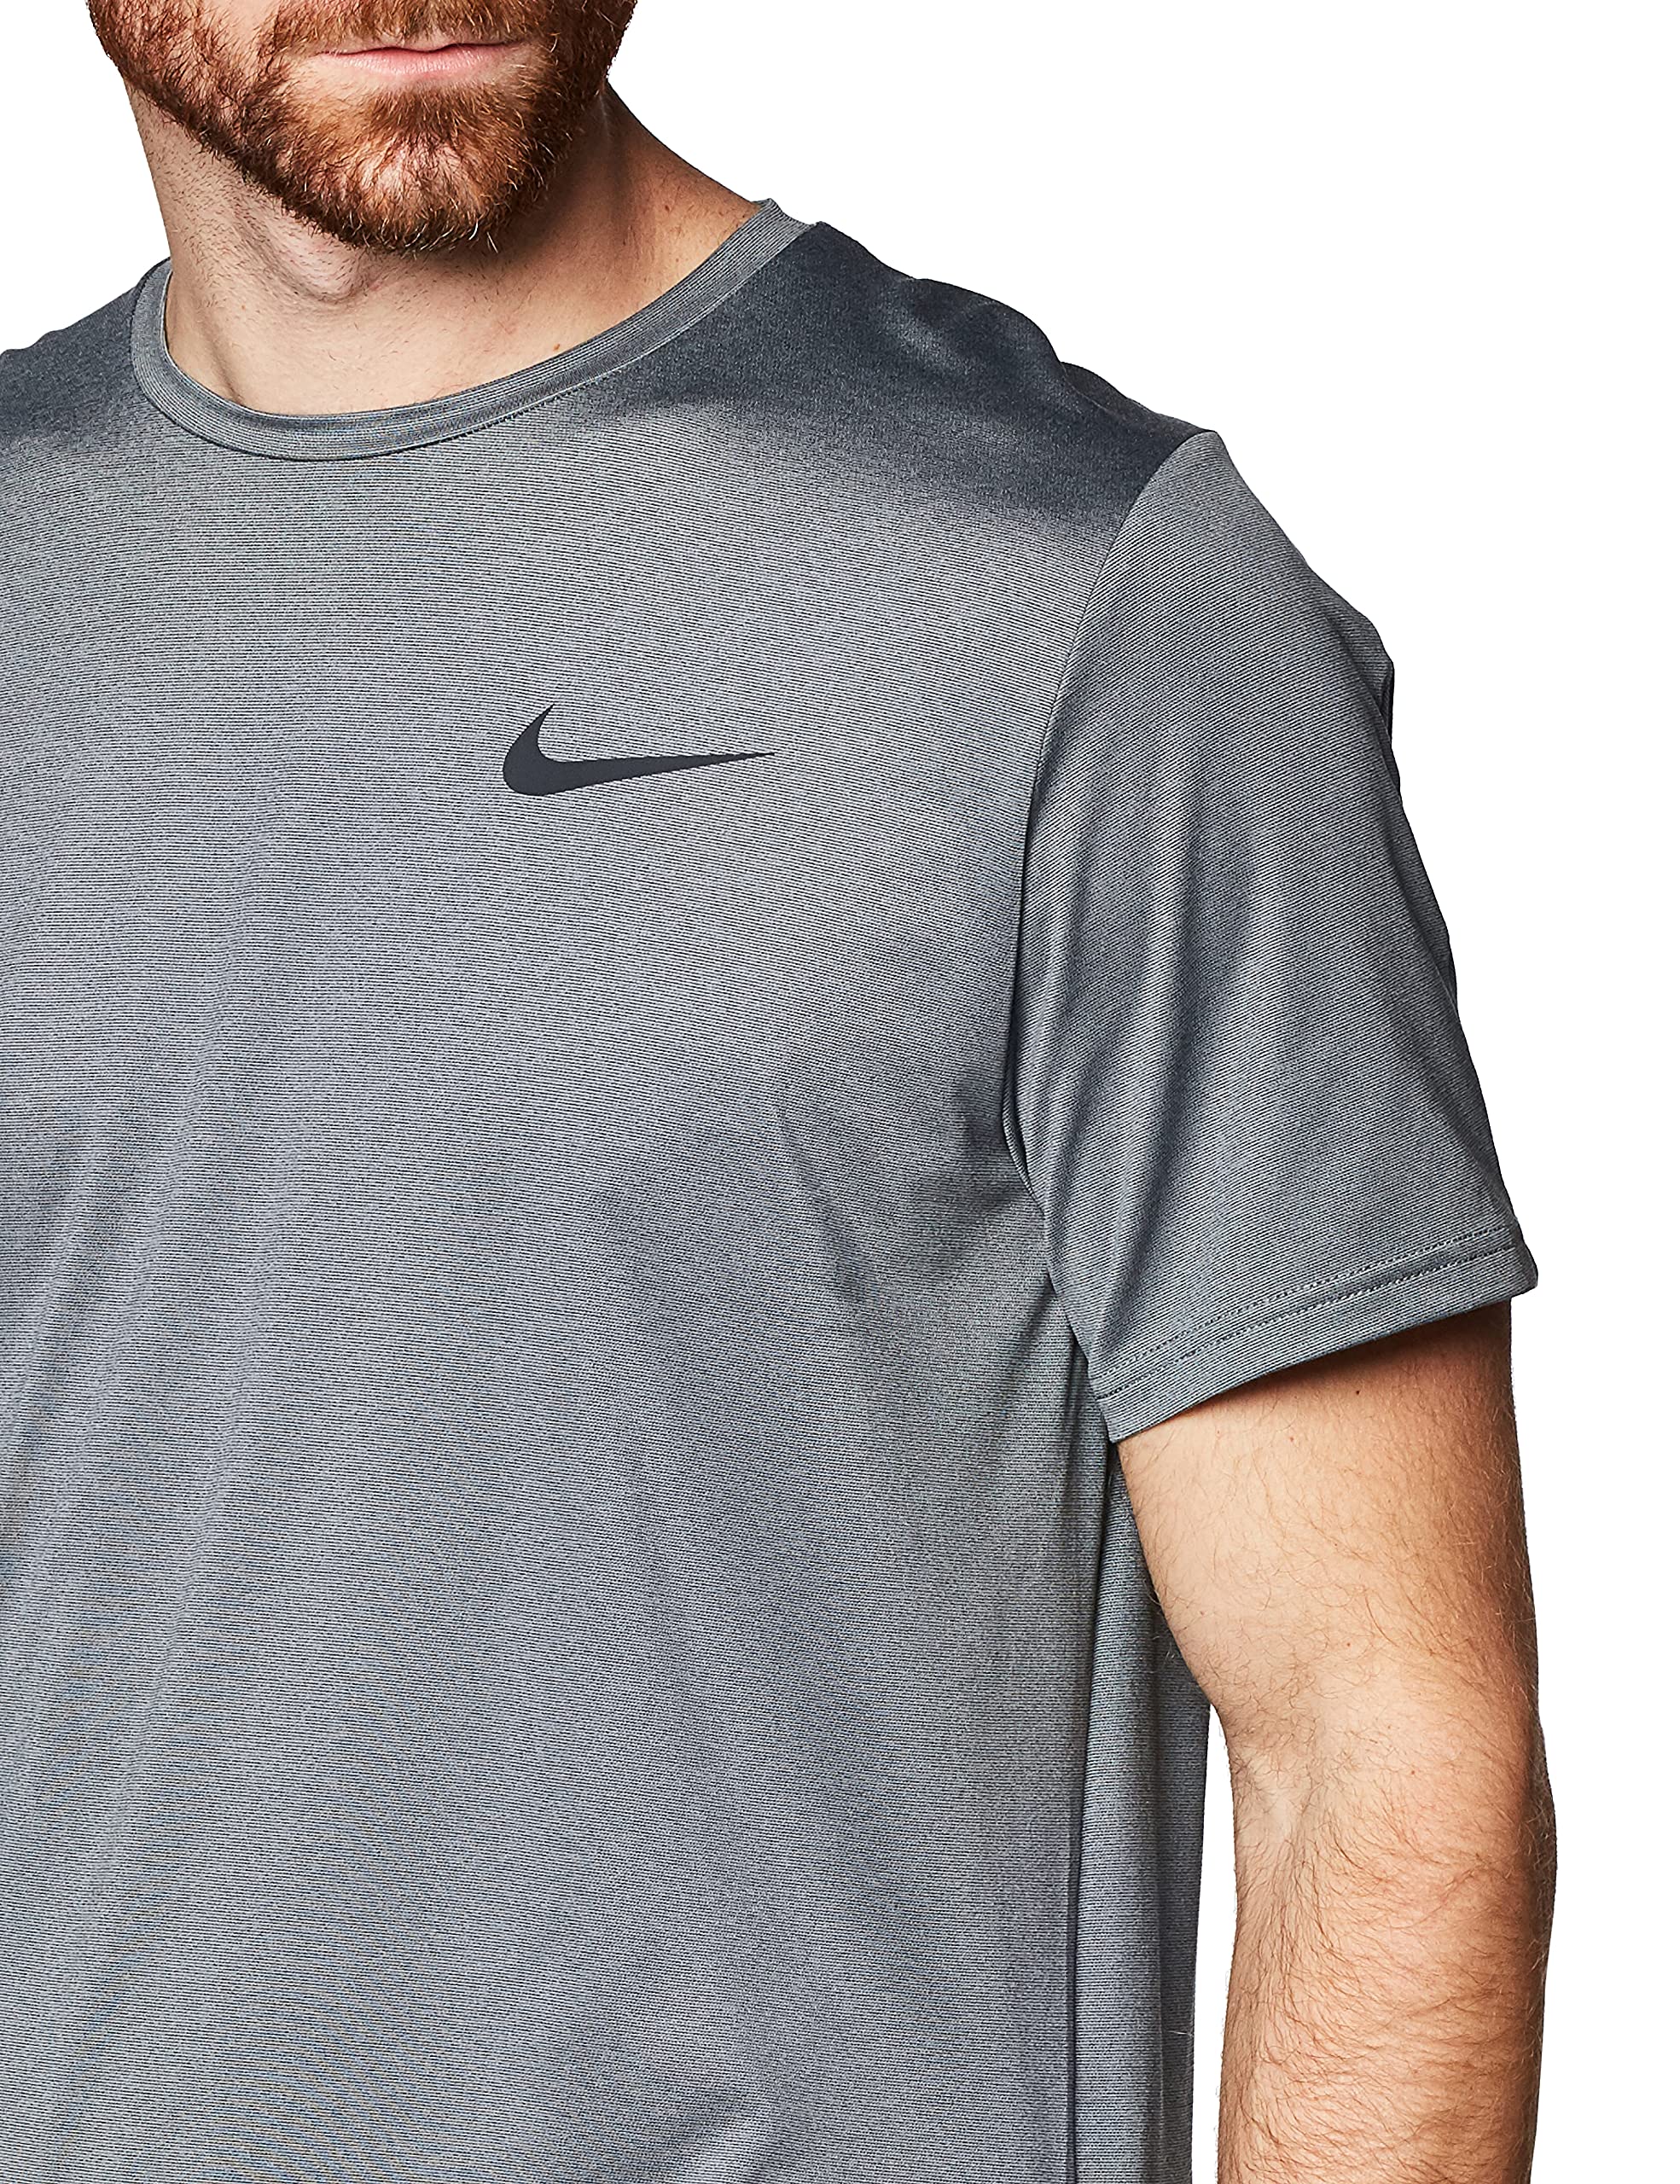 Nike Mens Training Fitness Pullover Top